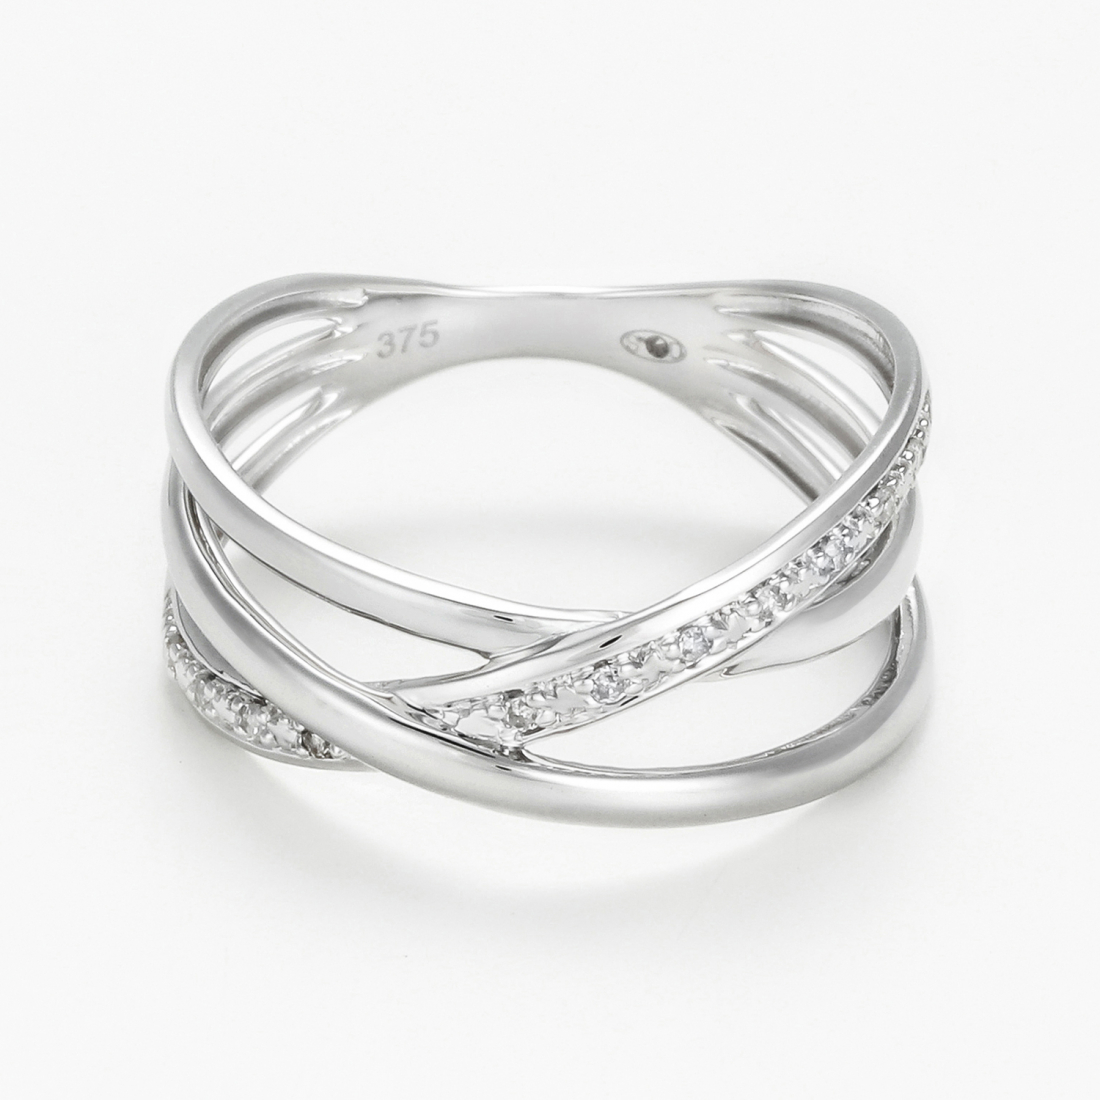 Women's 'Intertwined love' Ring